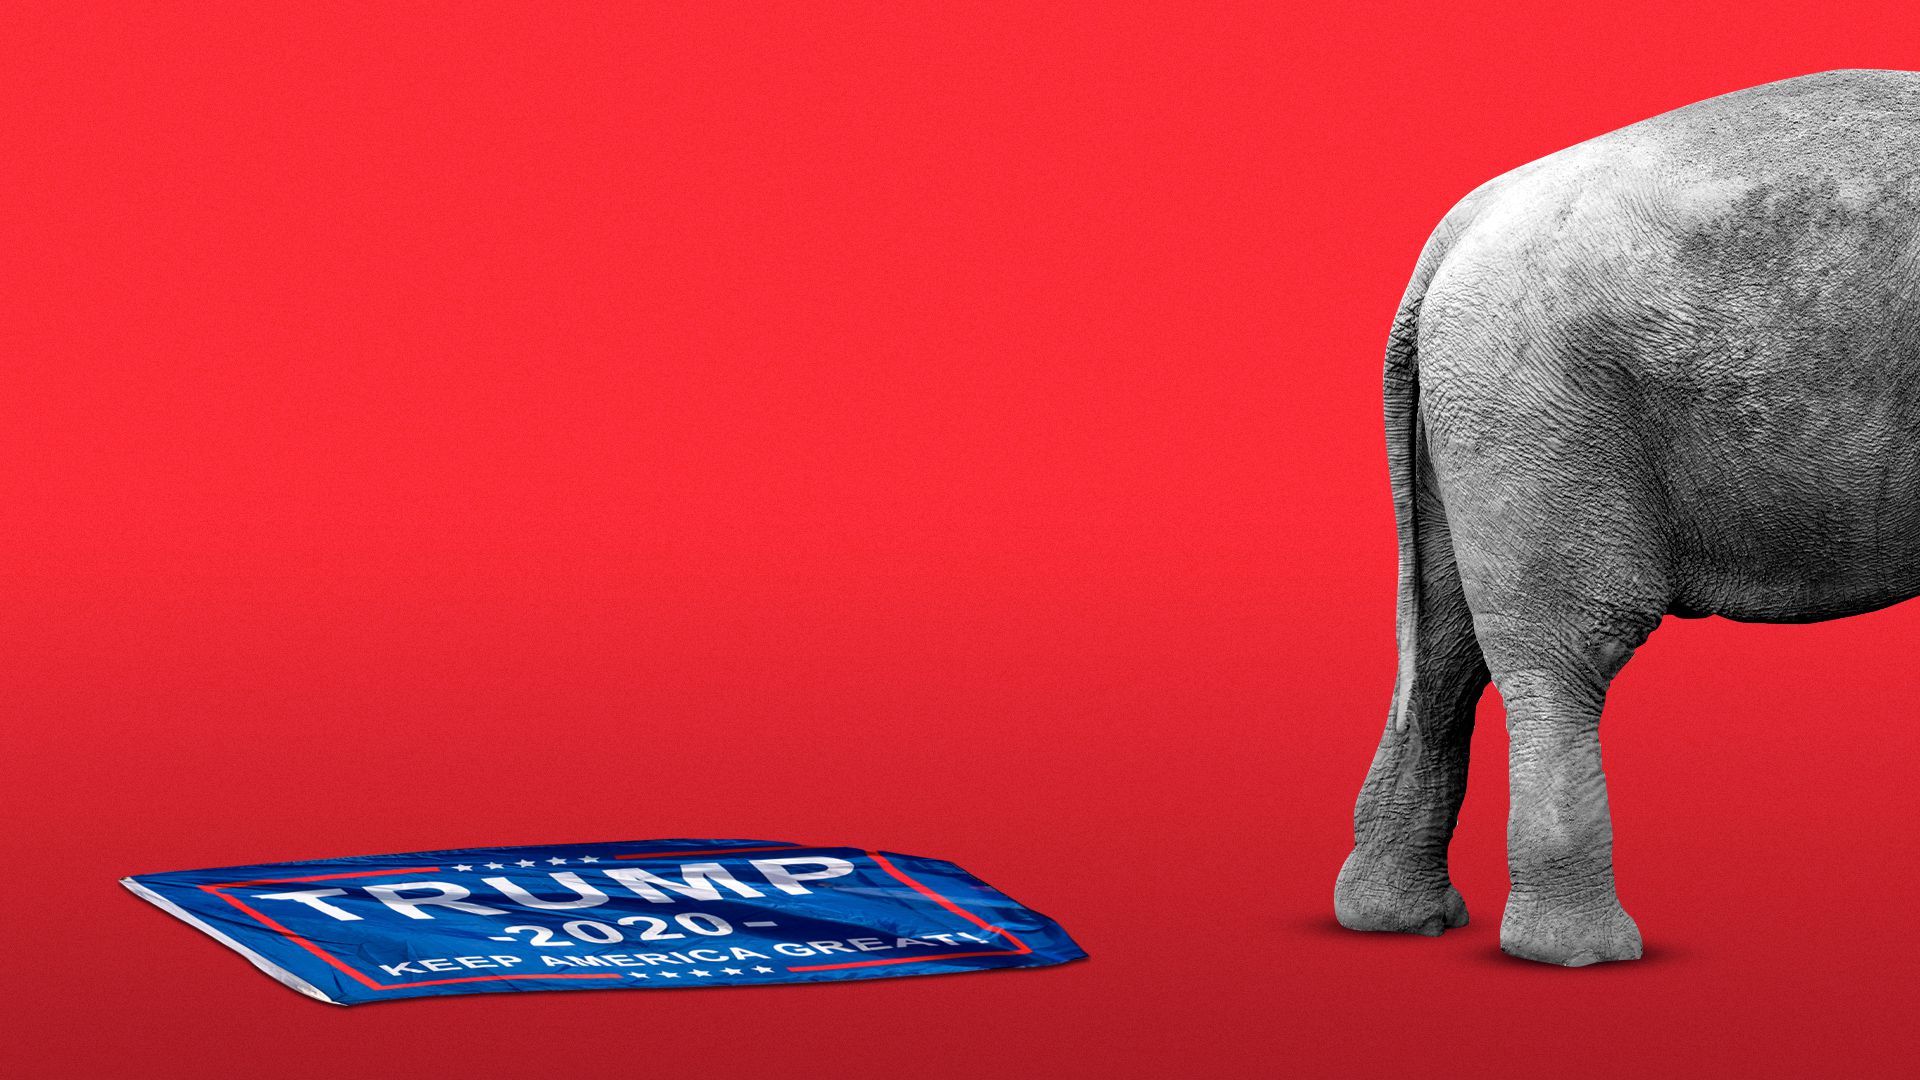 Illustration of an elephant walking away from a Trump flag that is crumpled on the ground.  